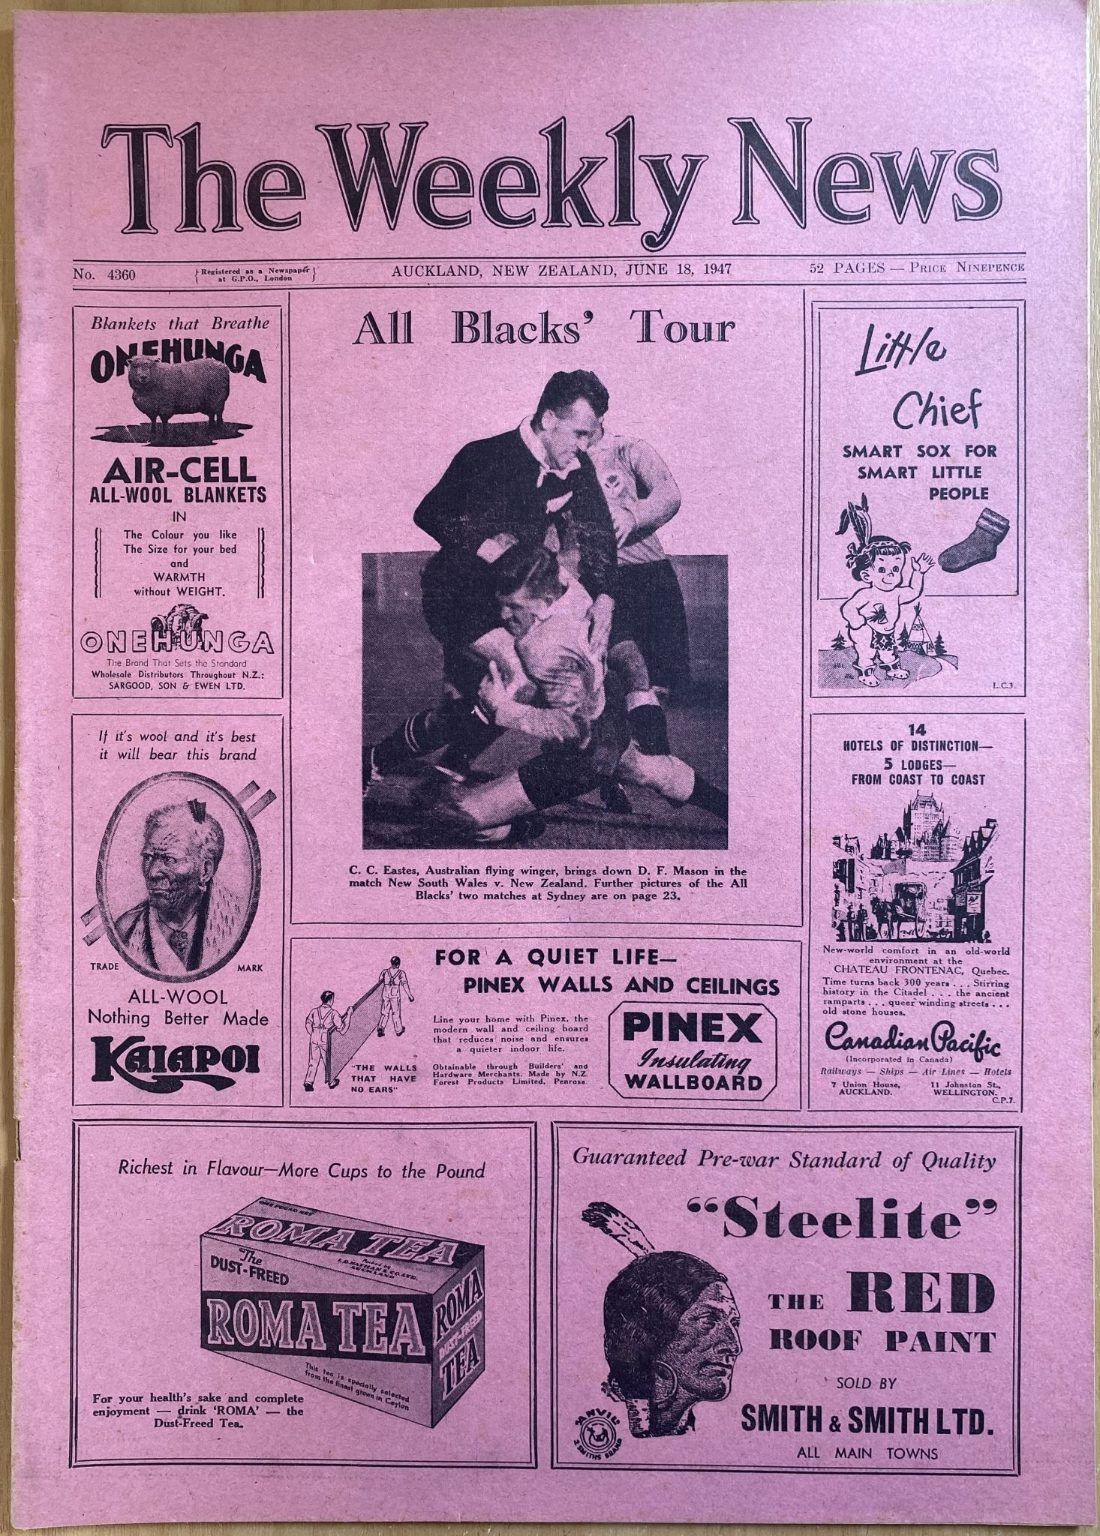 OLD NEWSPAPER: The Weekly News, No. 4360, 18 June 1947